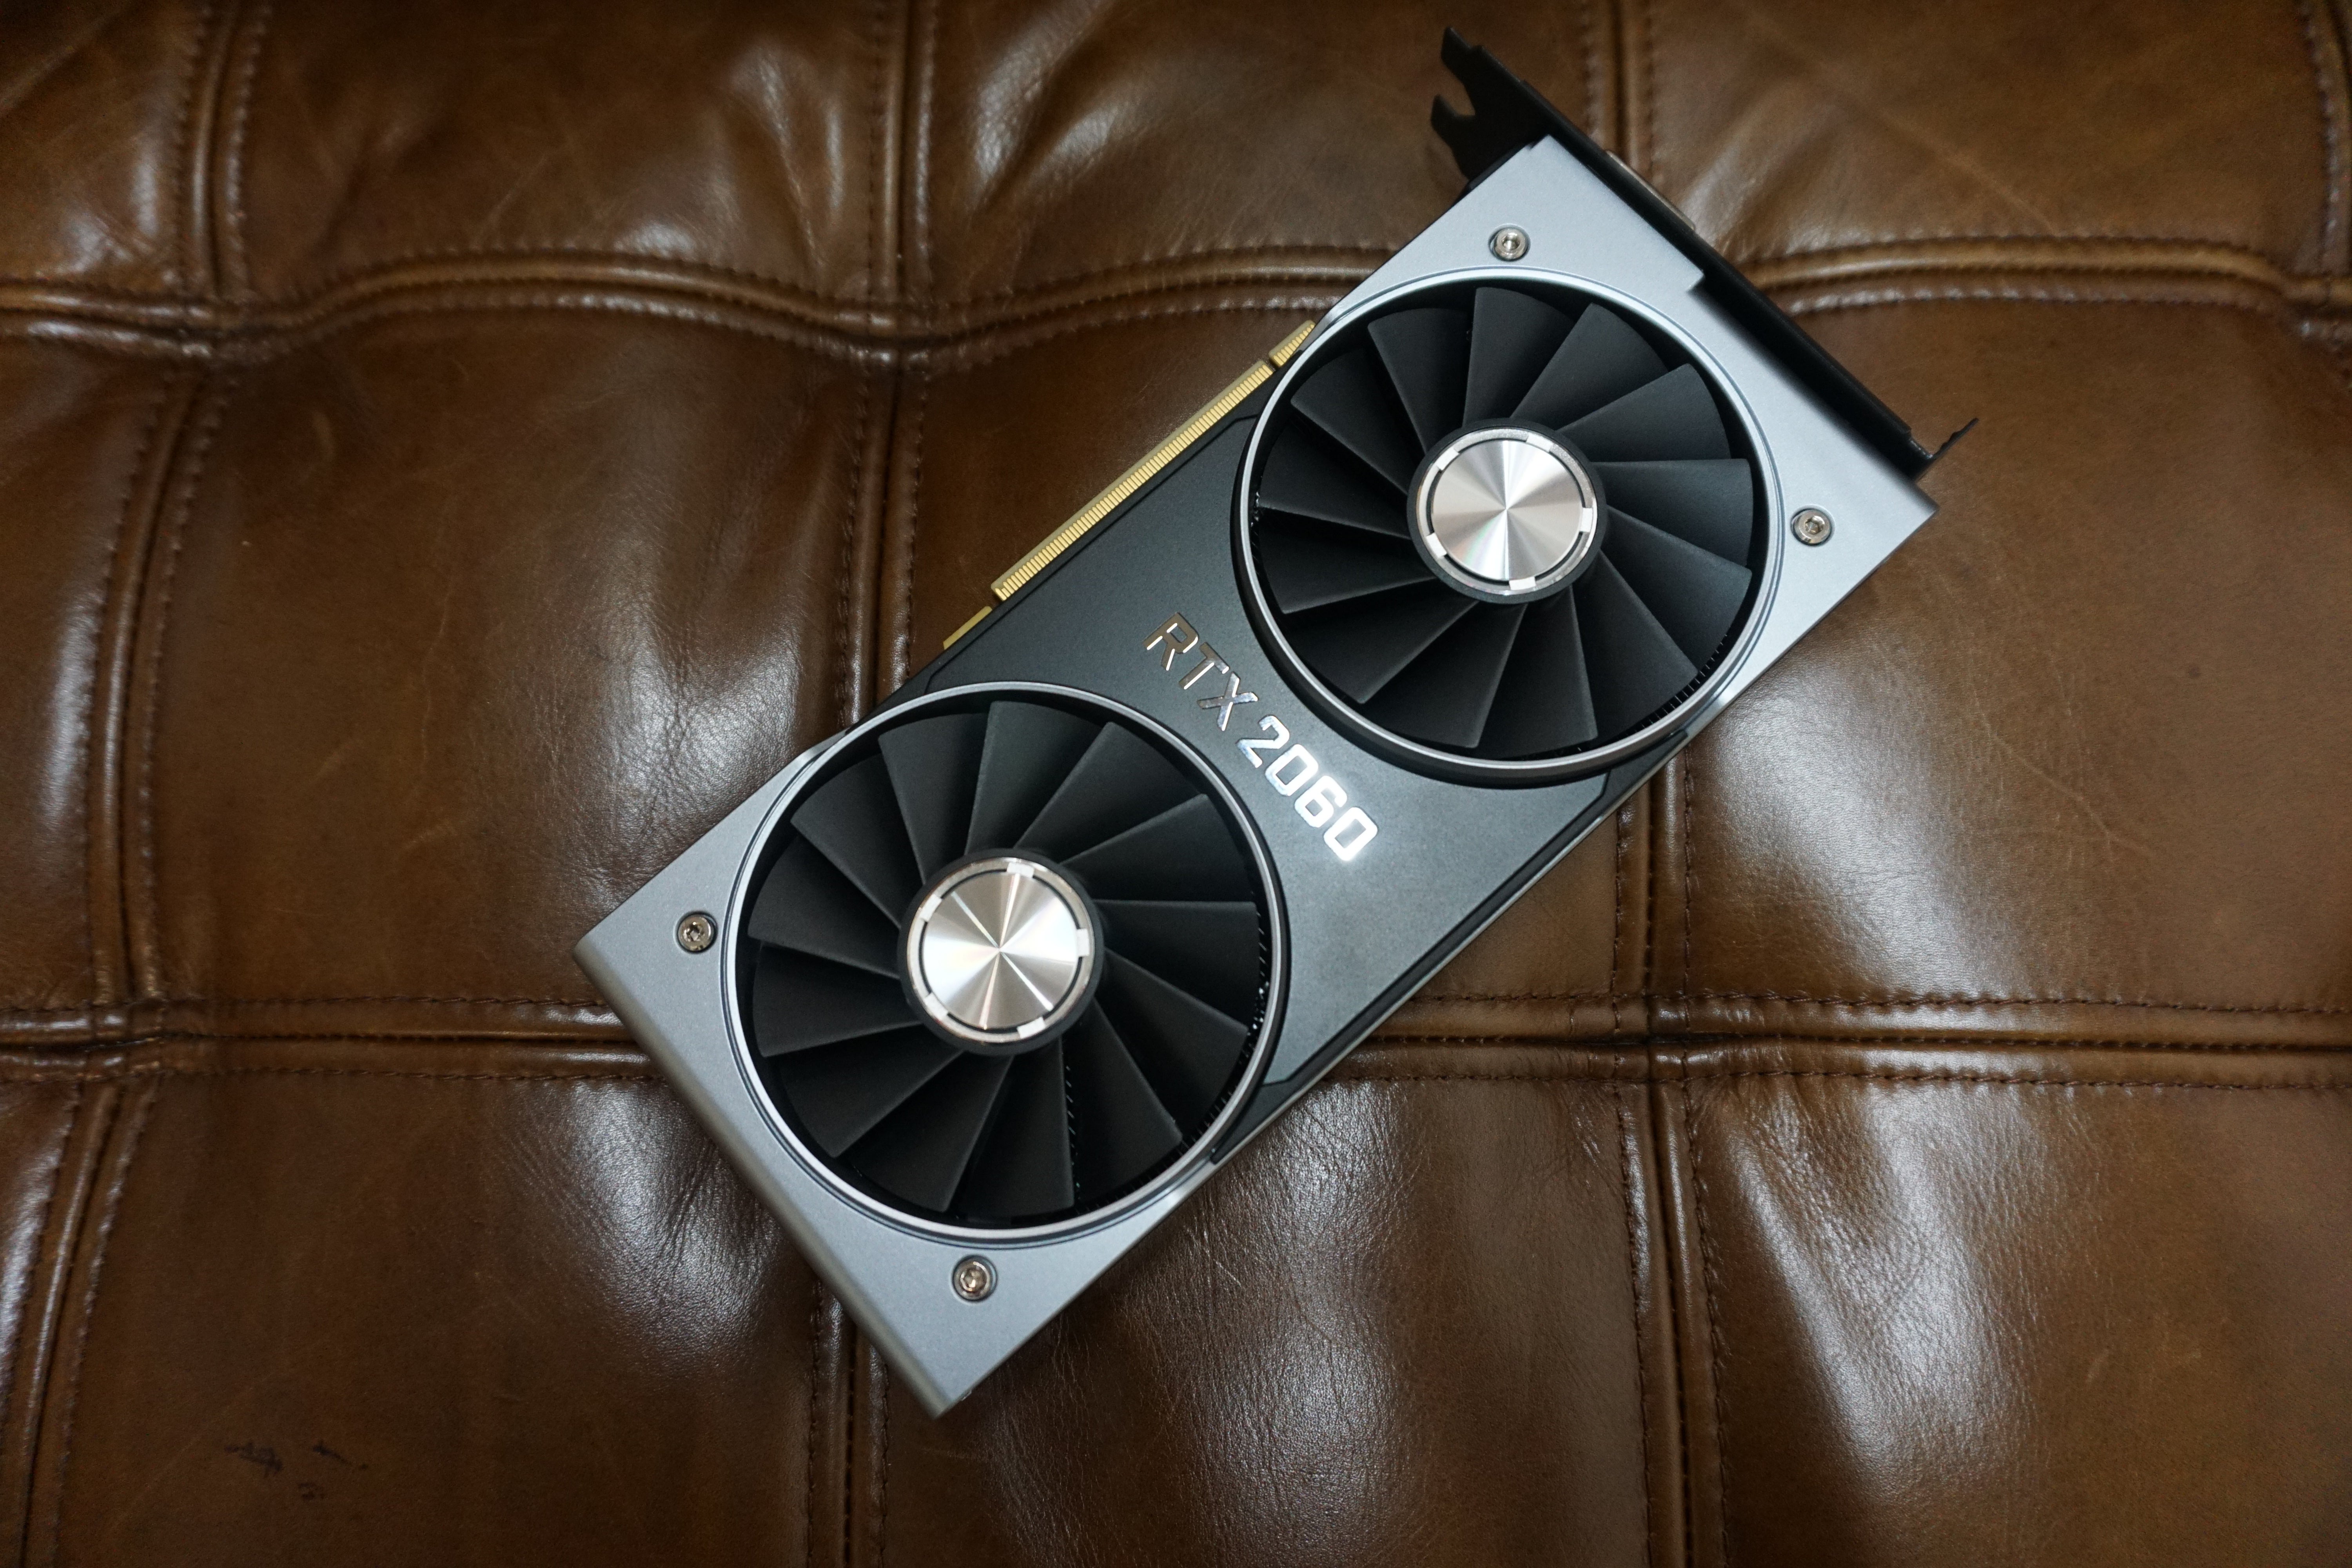 blanding Vend om Sorg Nvidia RTX 2060 review: The cheapest RTX card is an affordable wonder